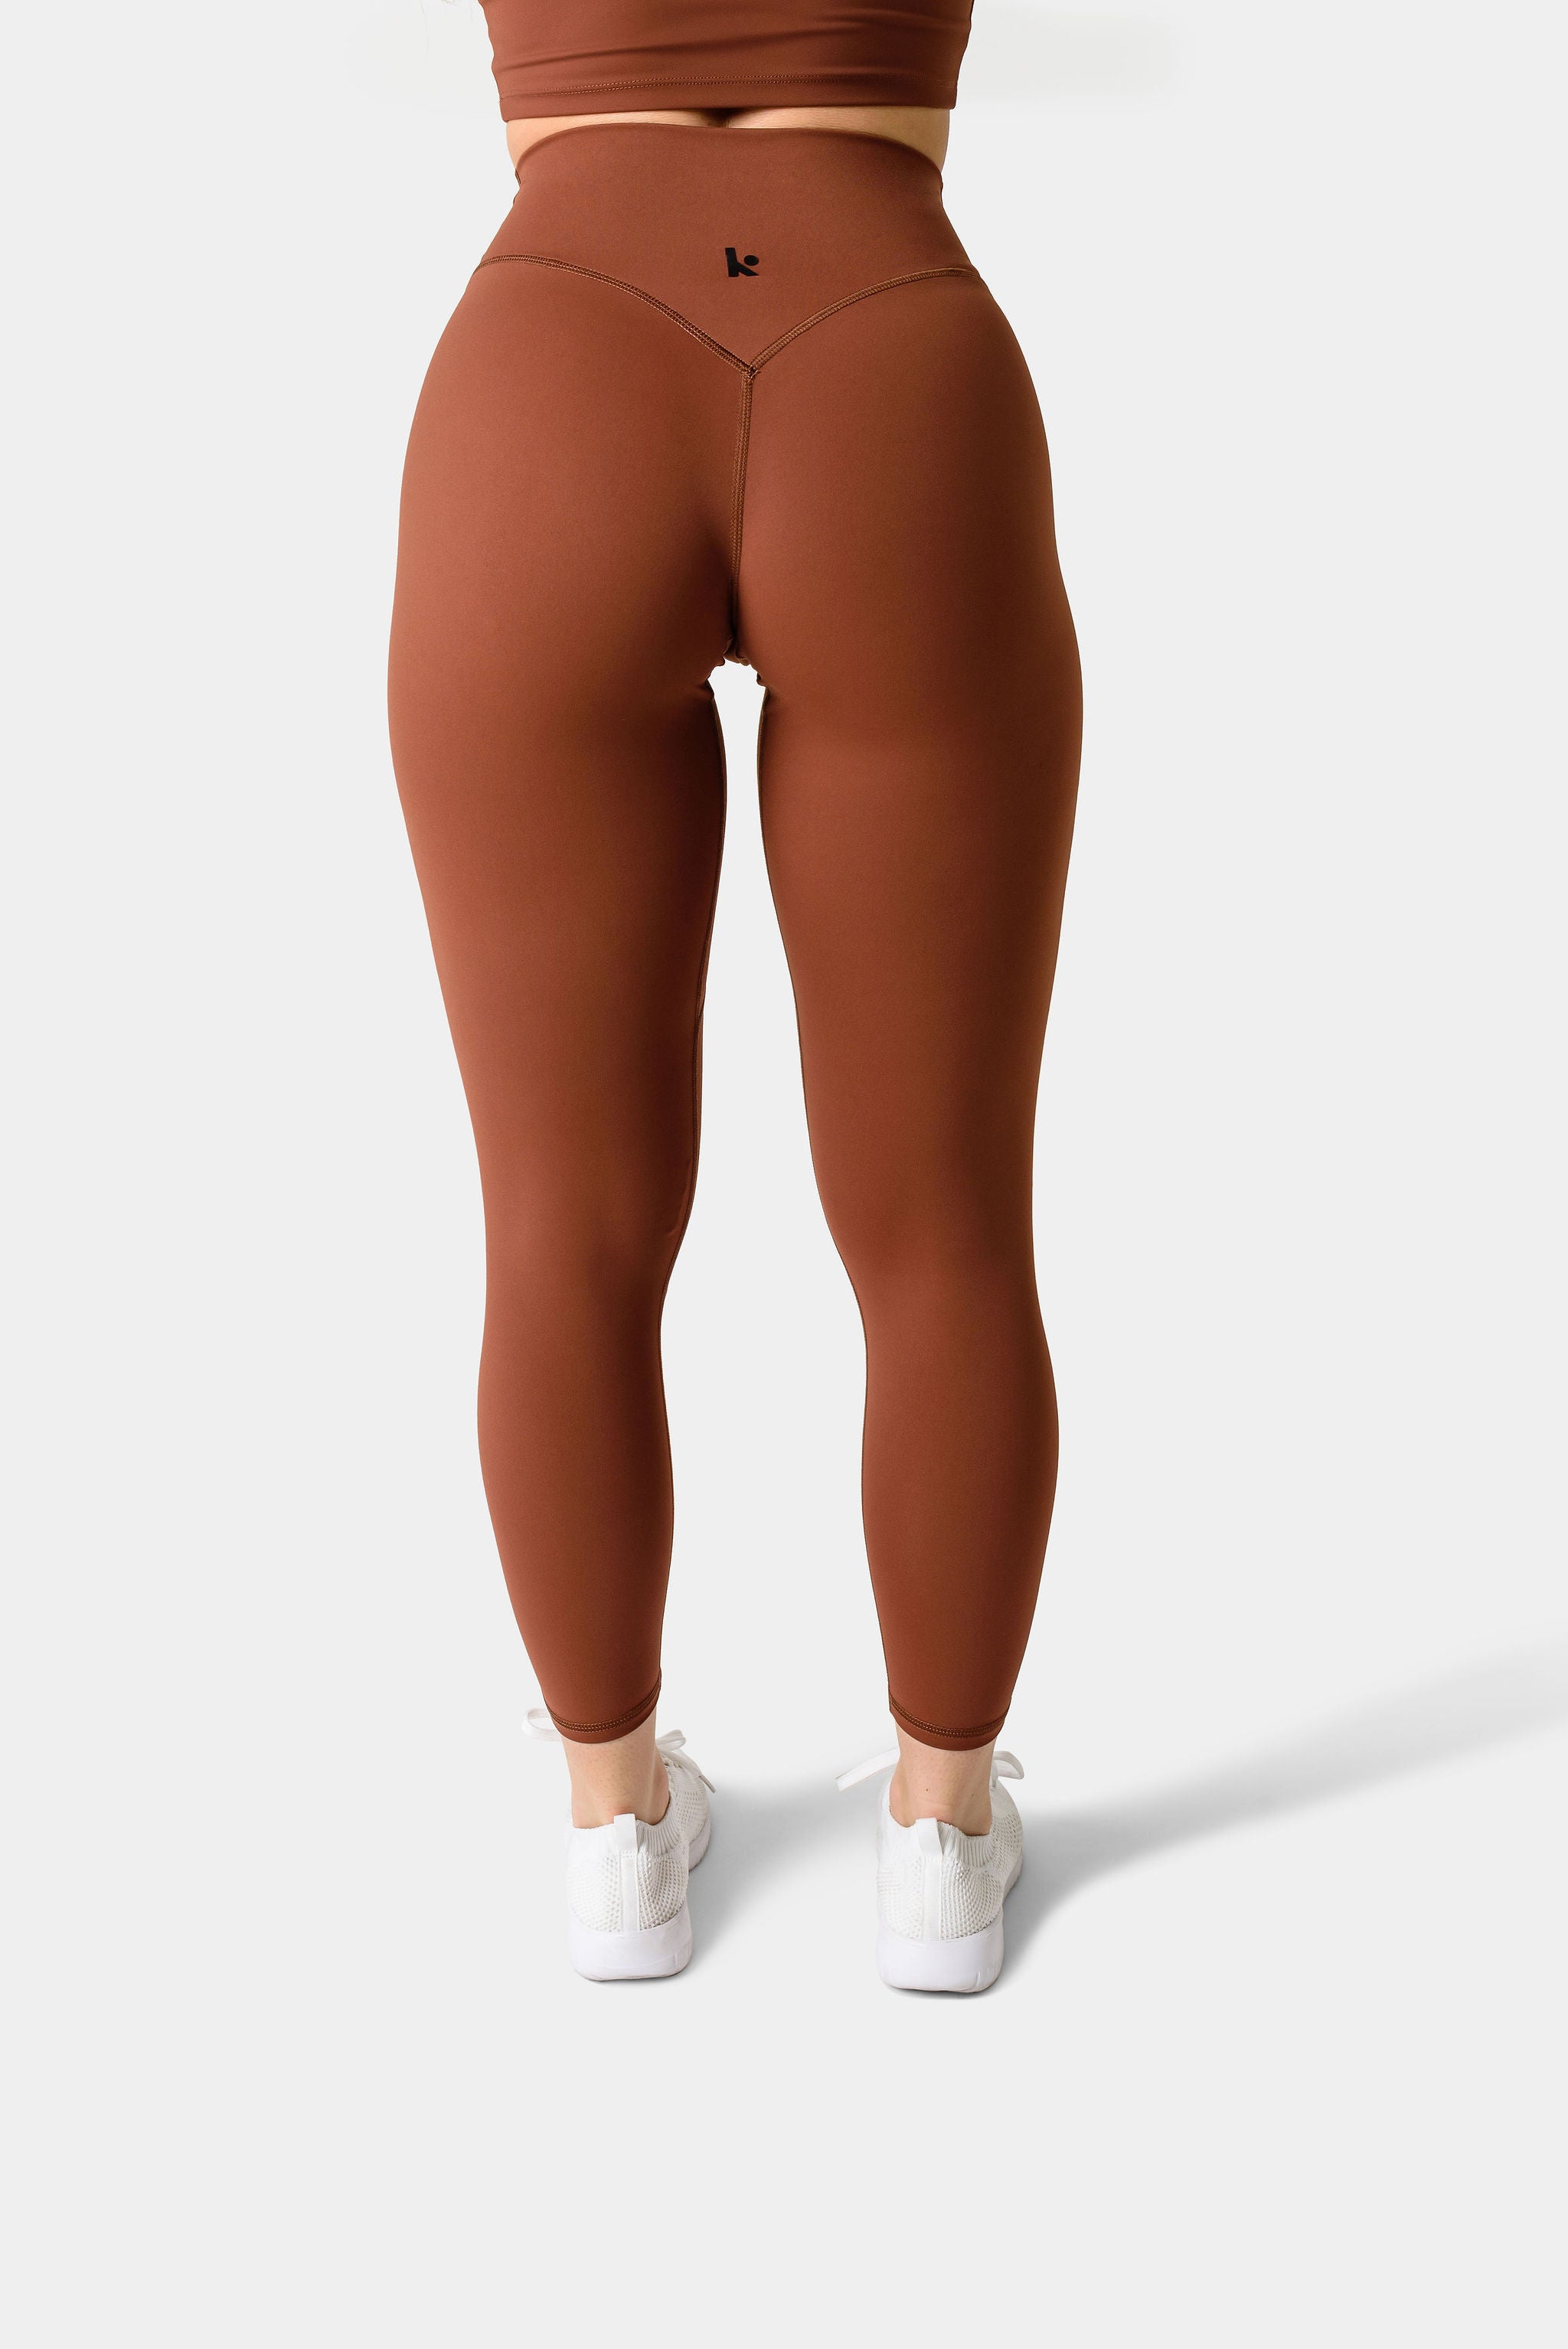 Women's Everyday Soft Ultra High-Rise Flare Leggings - All in Motion Brown  XL 1 ct